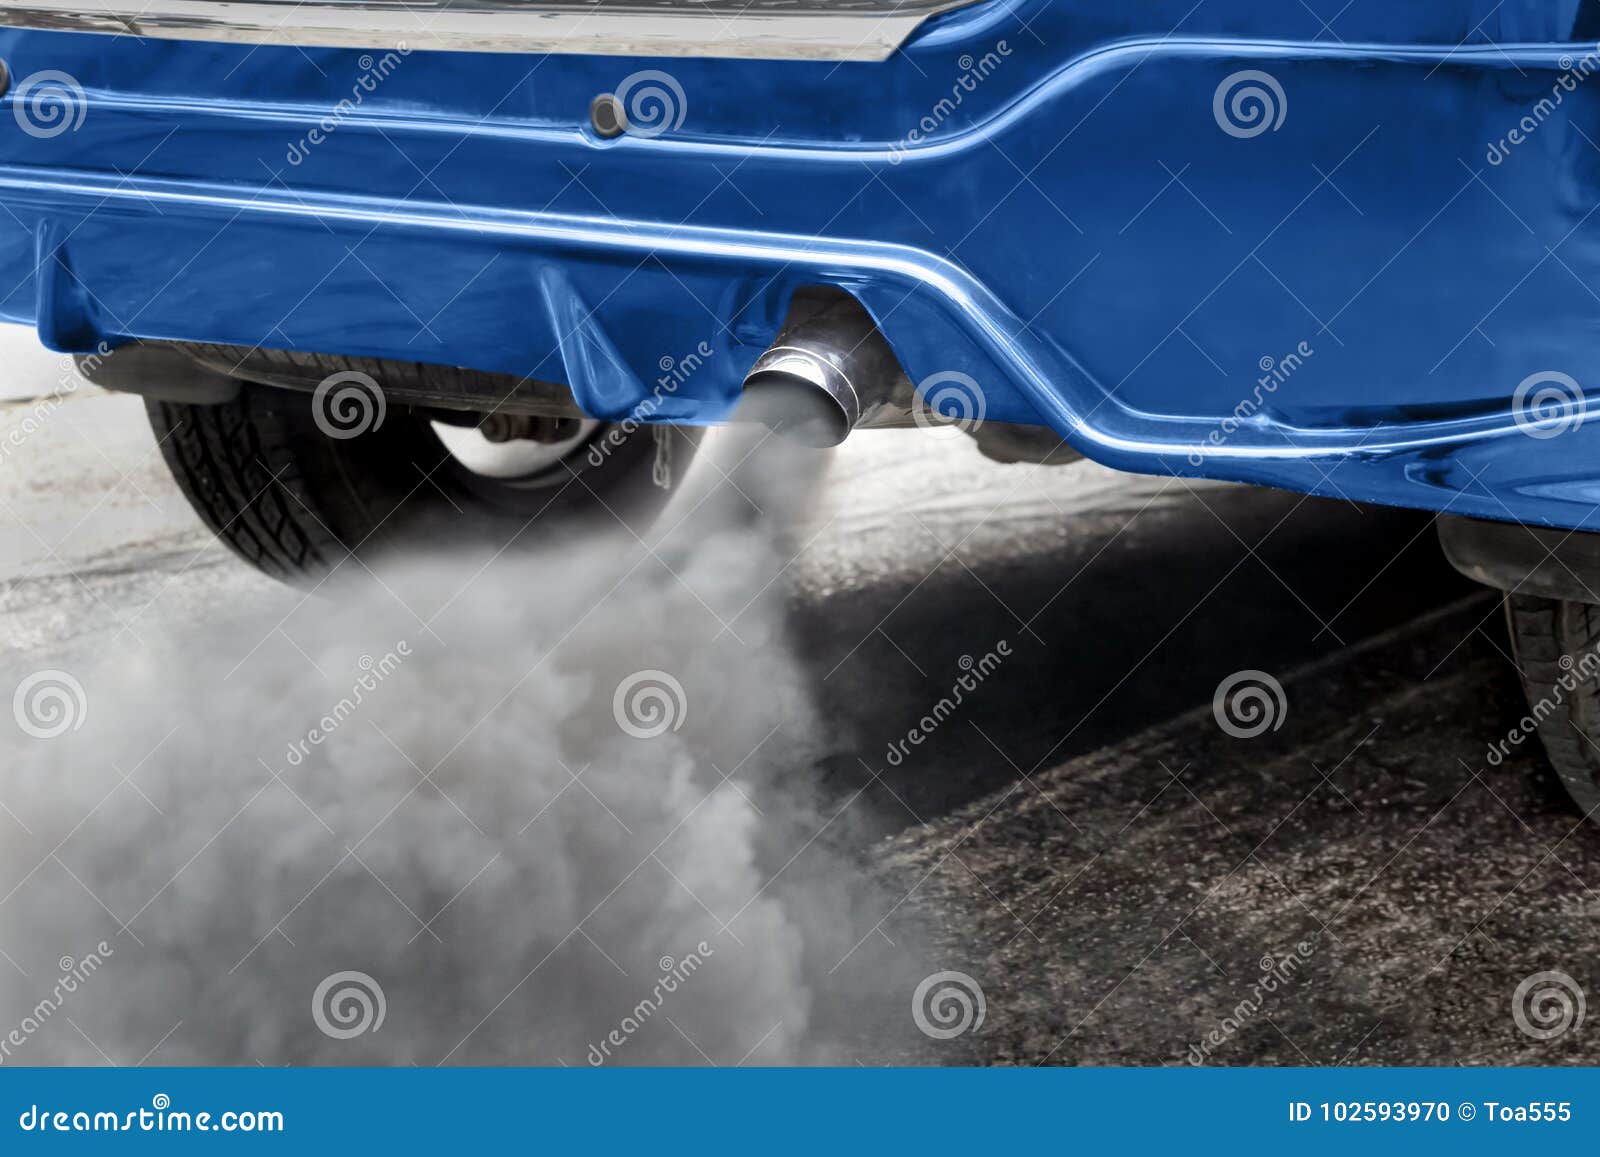 air pollution from vehicle exhaust pipe on road